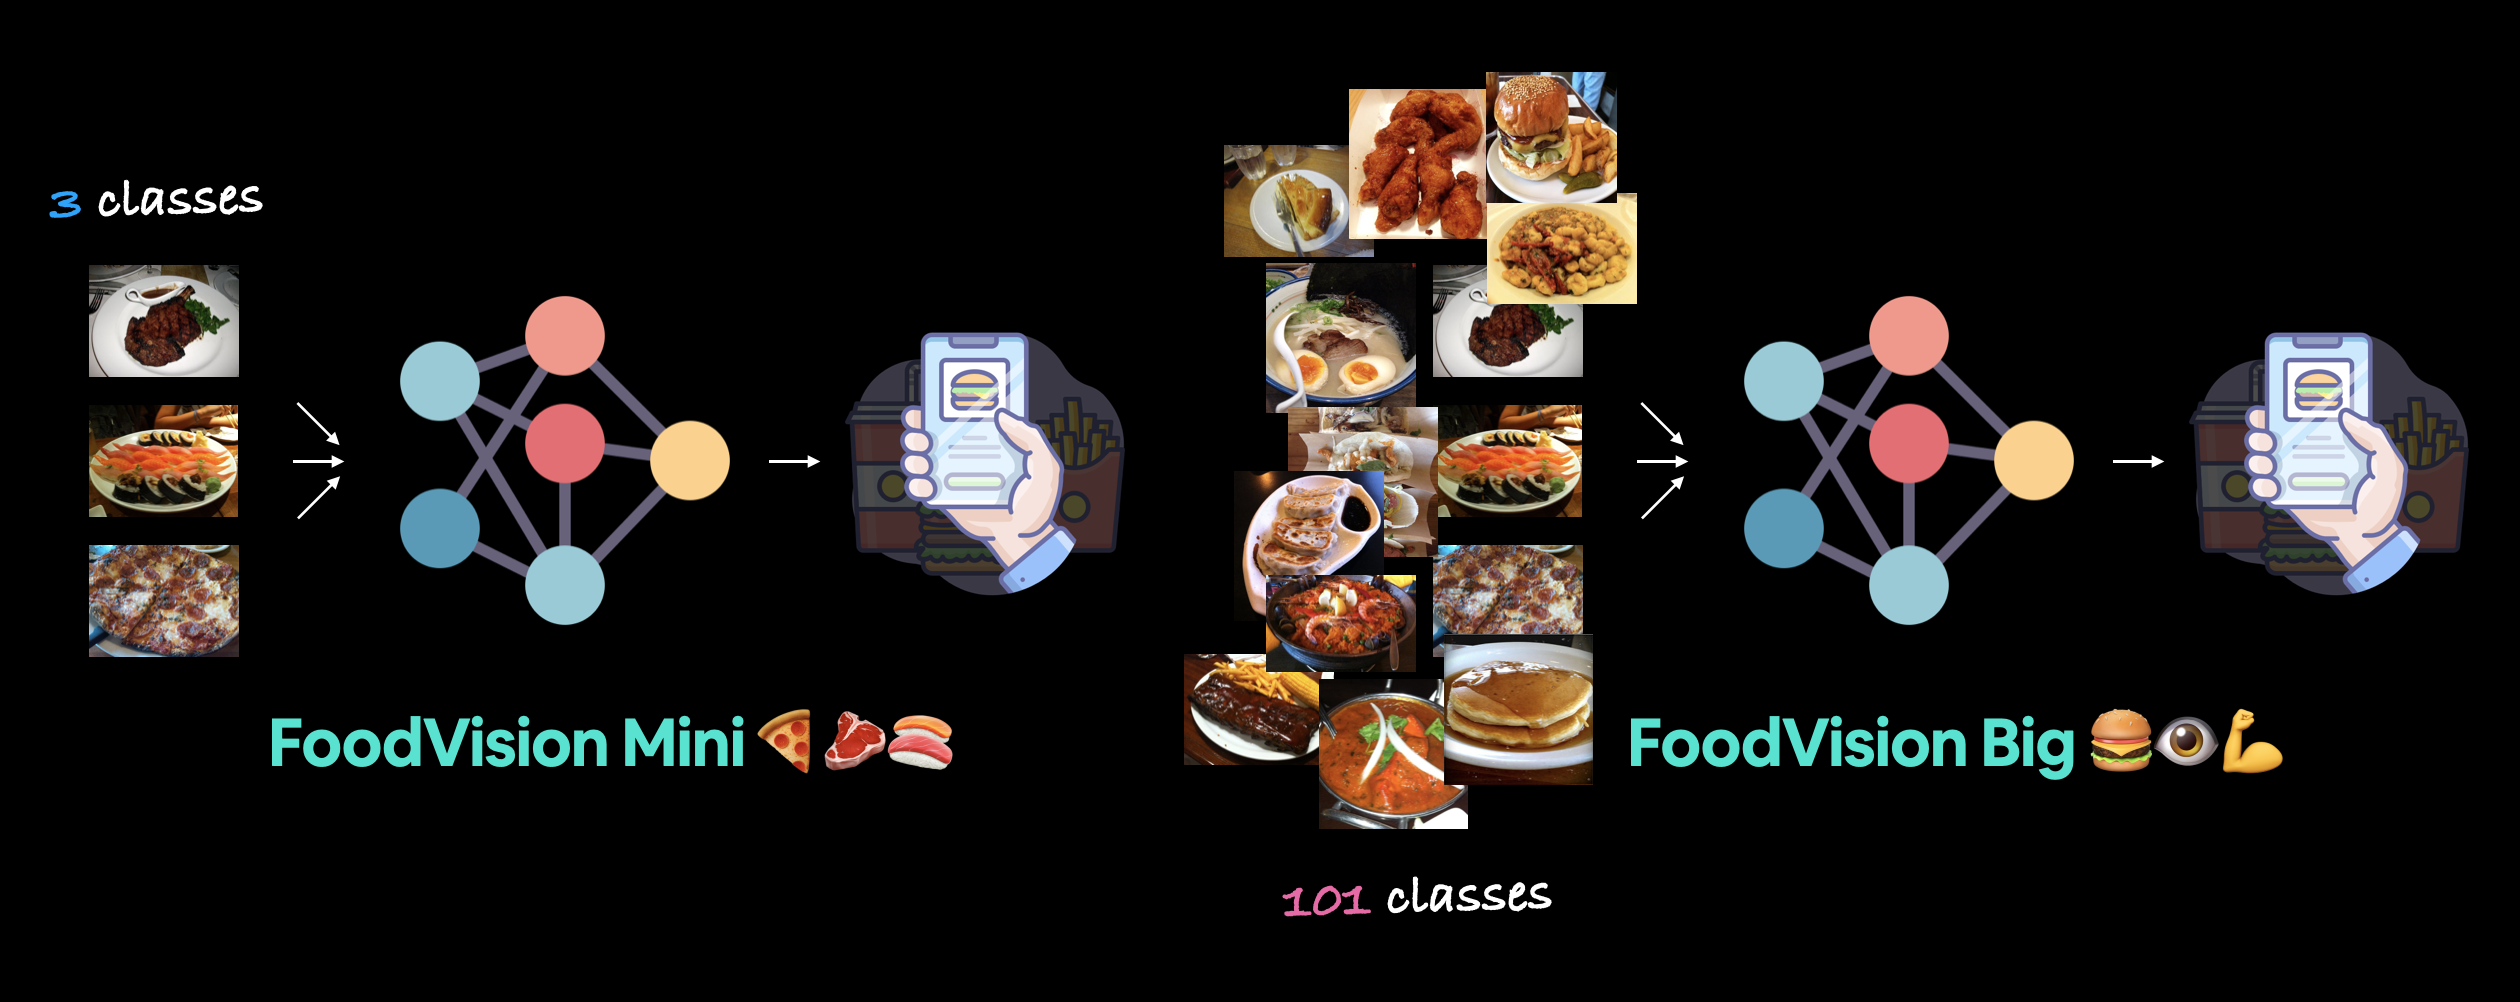 foodvision mini model on three classes: pizza, steak, sushi and foodvision big on all of the 101 classes in the food101 dataset